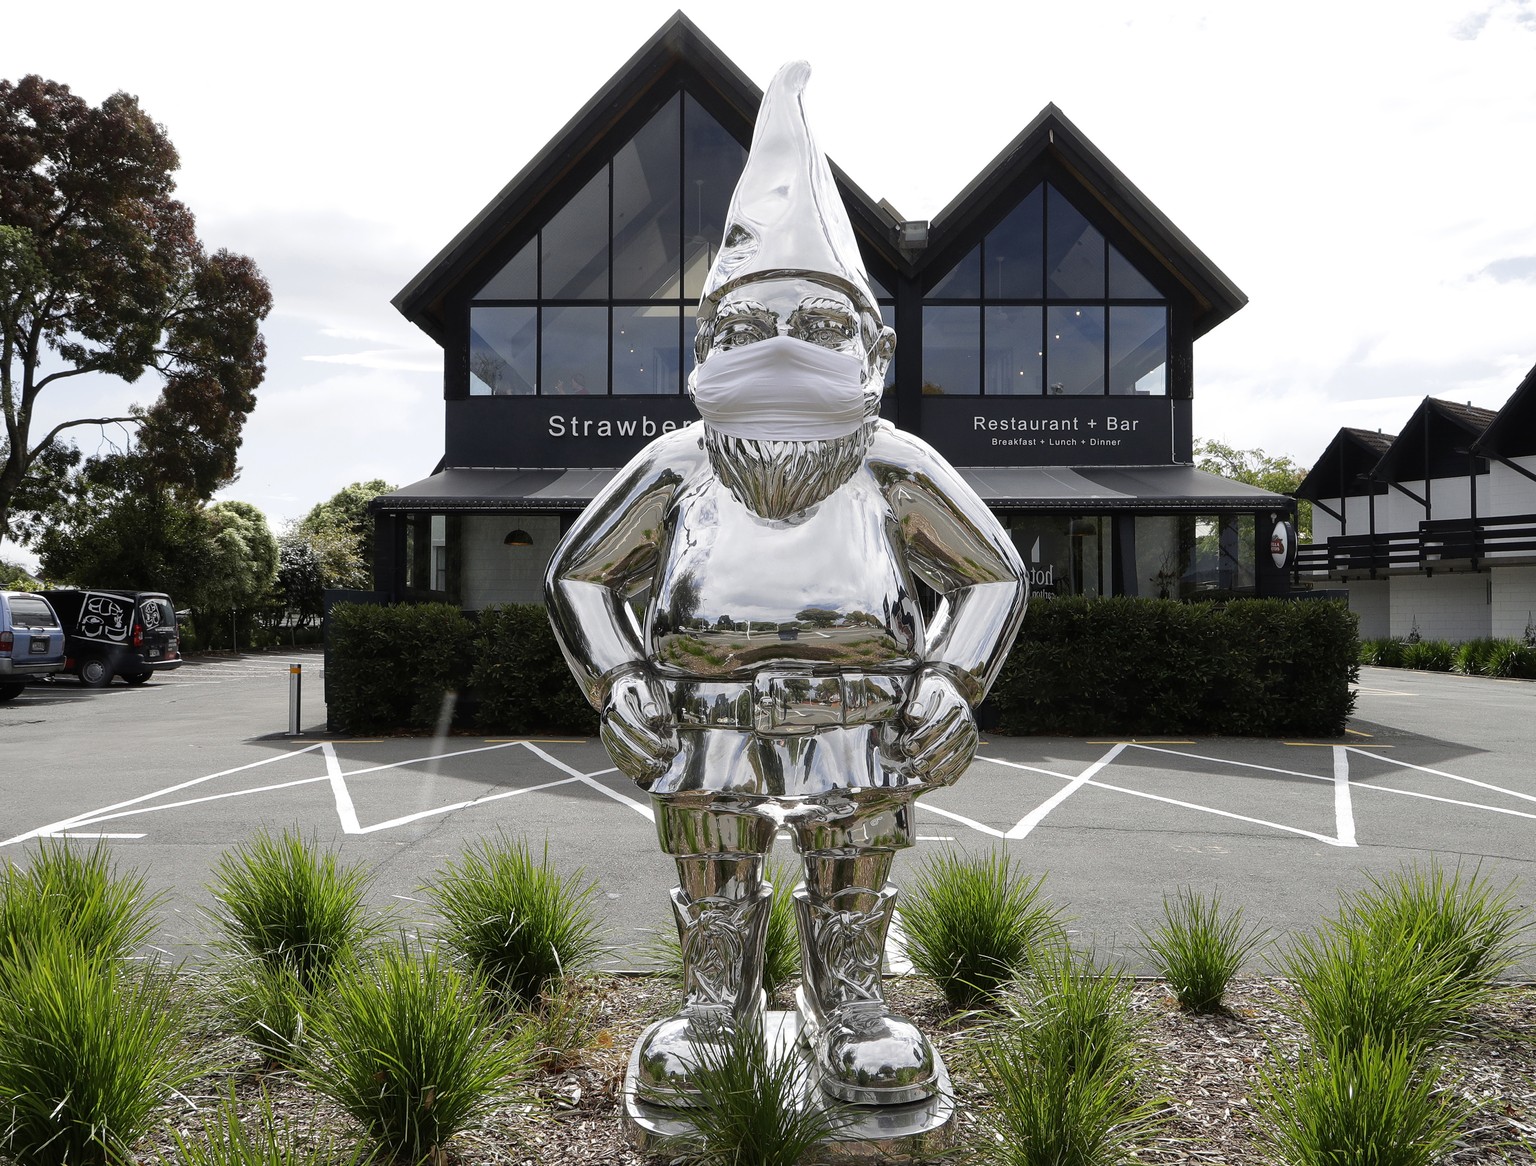 A statue outside a restaurant wears a mask in central Christchurch, New Zealand, Monday, March 23, 2020. New Zealand Prime Minister Jacinda Ardern announced Monday that schools and non-essential servi ...